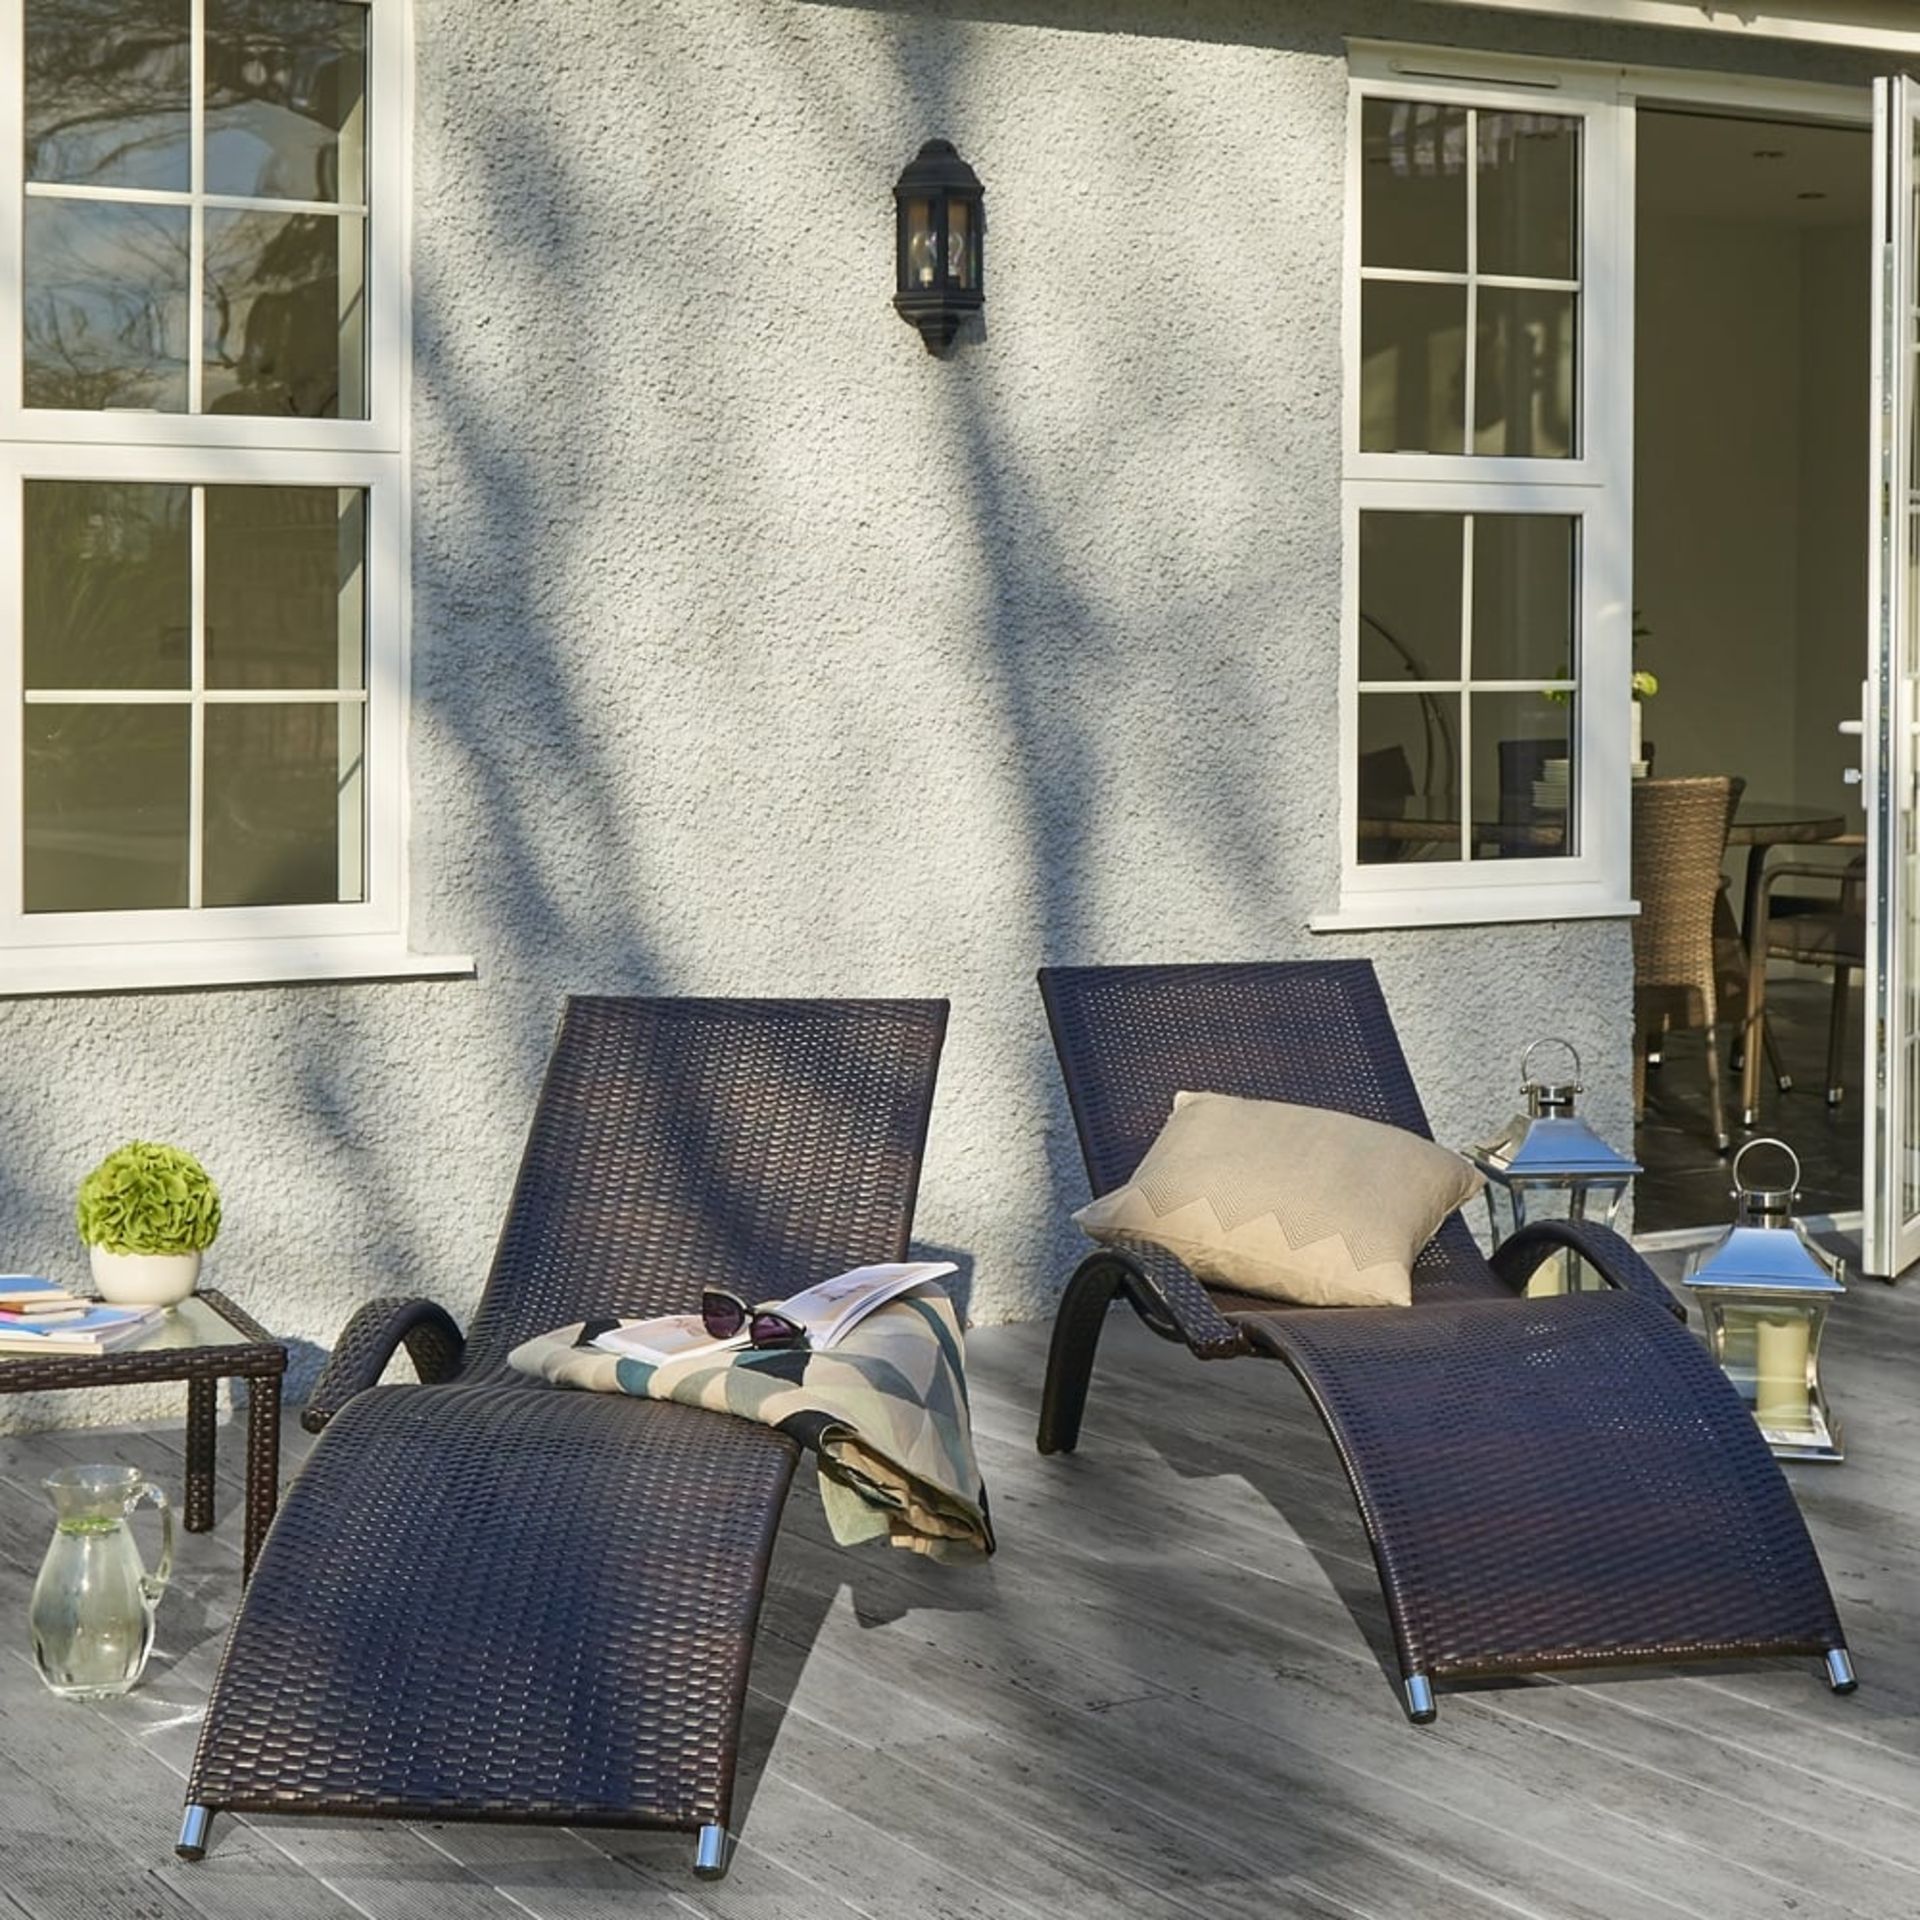 A Pair of Poole Sun loungers and Side Table